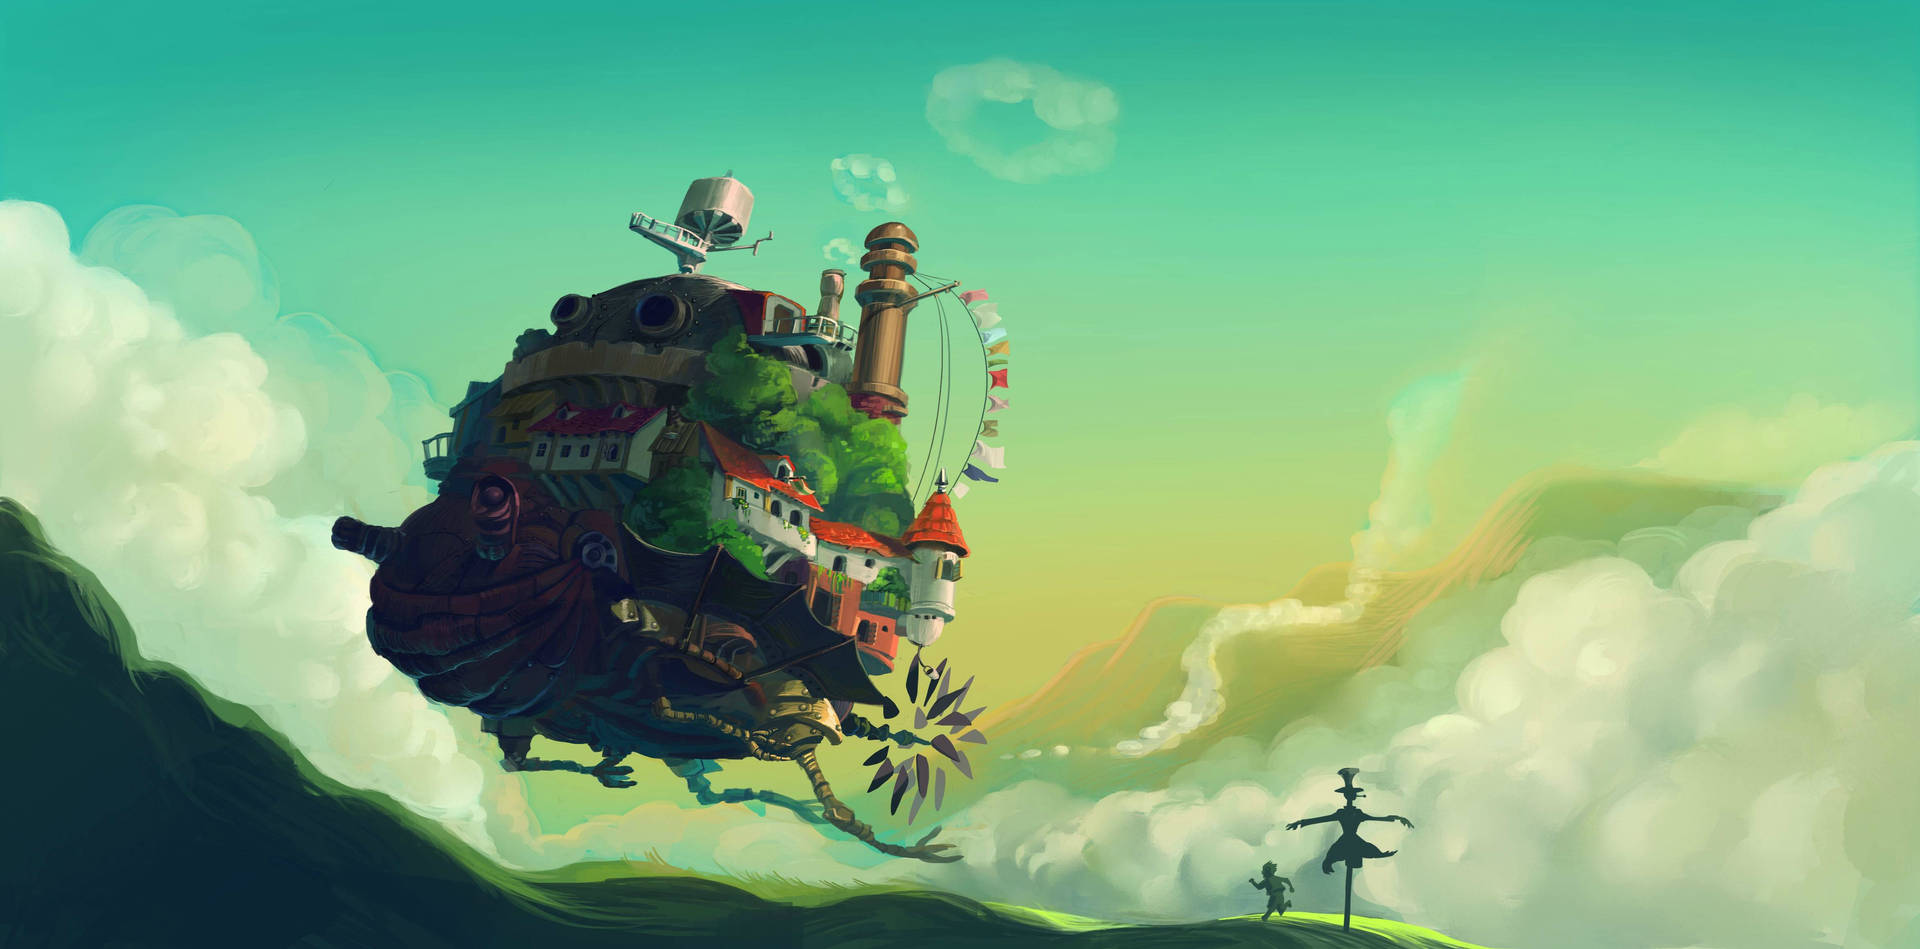 Ghibli 4691X2319 Wallpaper and Background Image